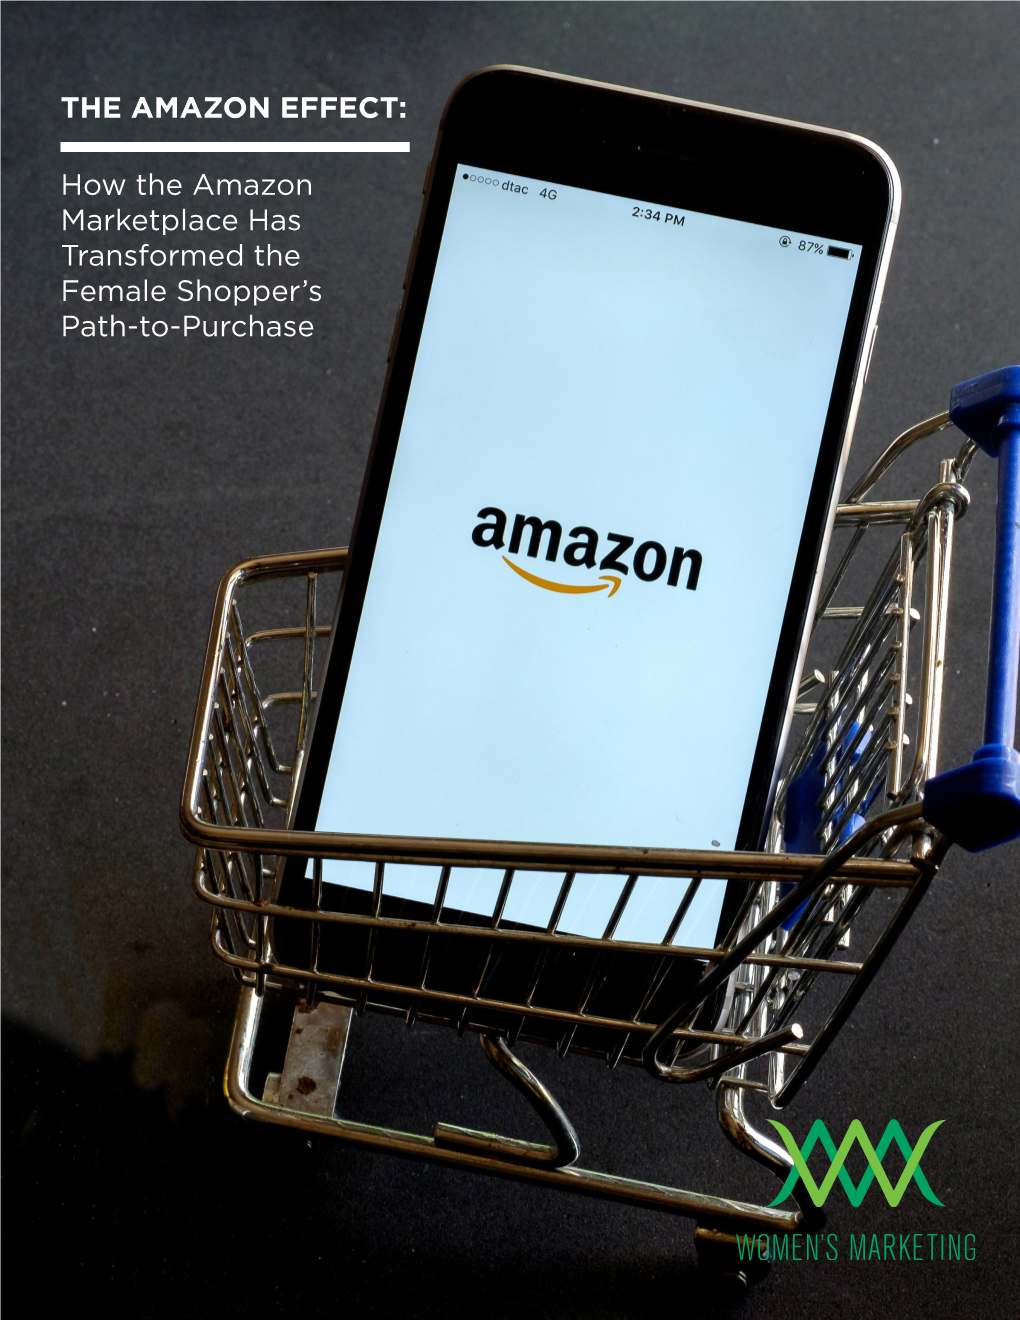 THE AMAZON EFFECT: How the Amazon Marketplace Has Transformed the Female Shopper's Path-To-Purchase